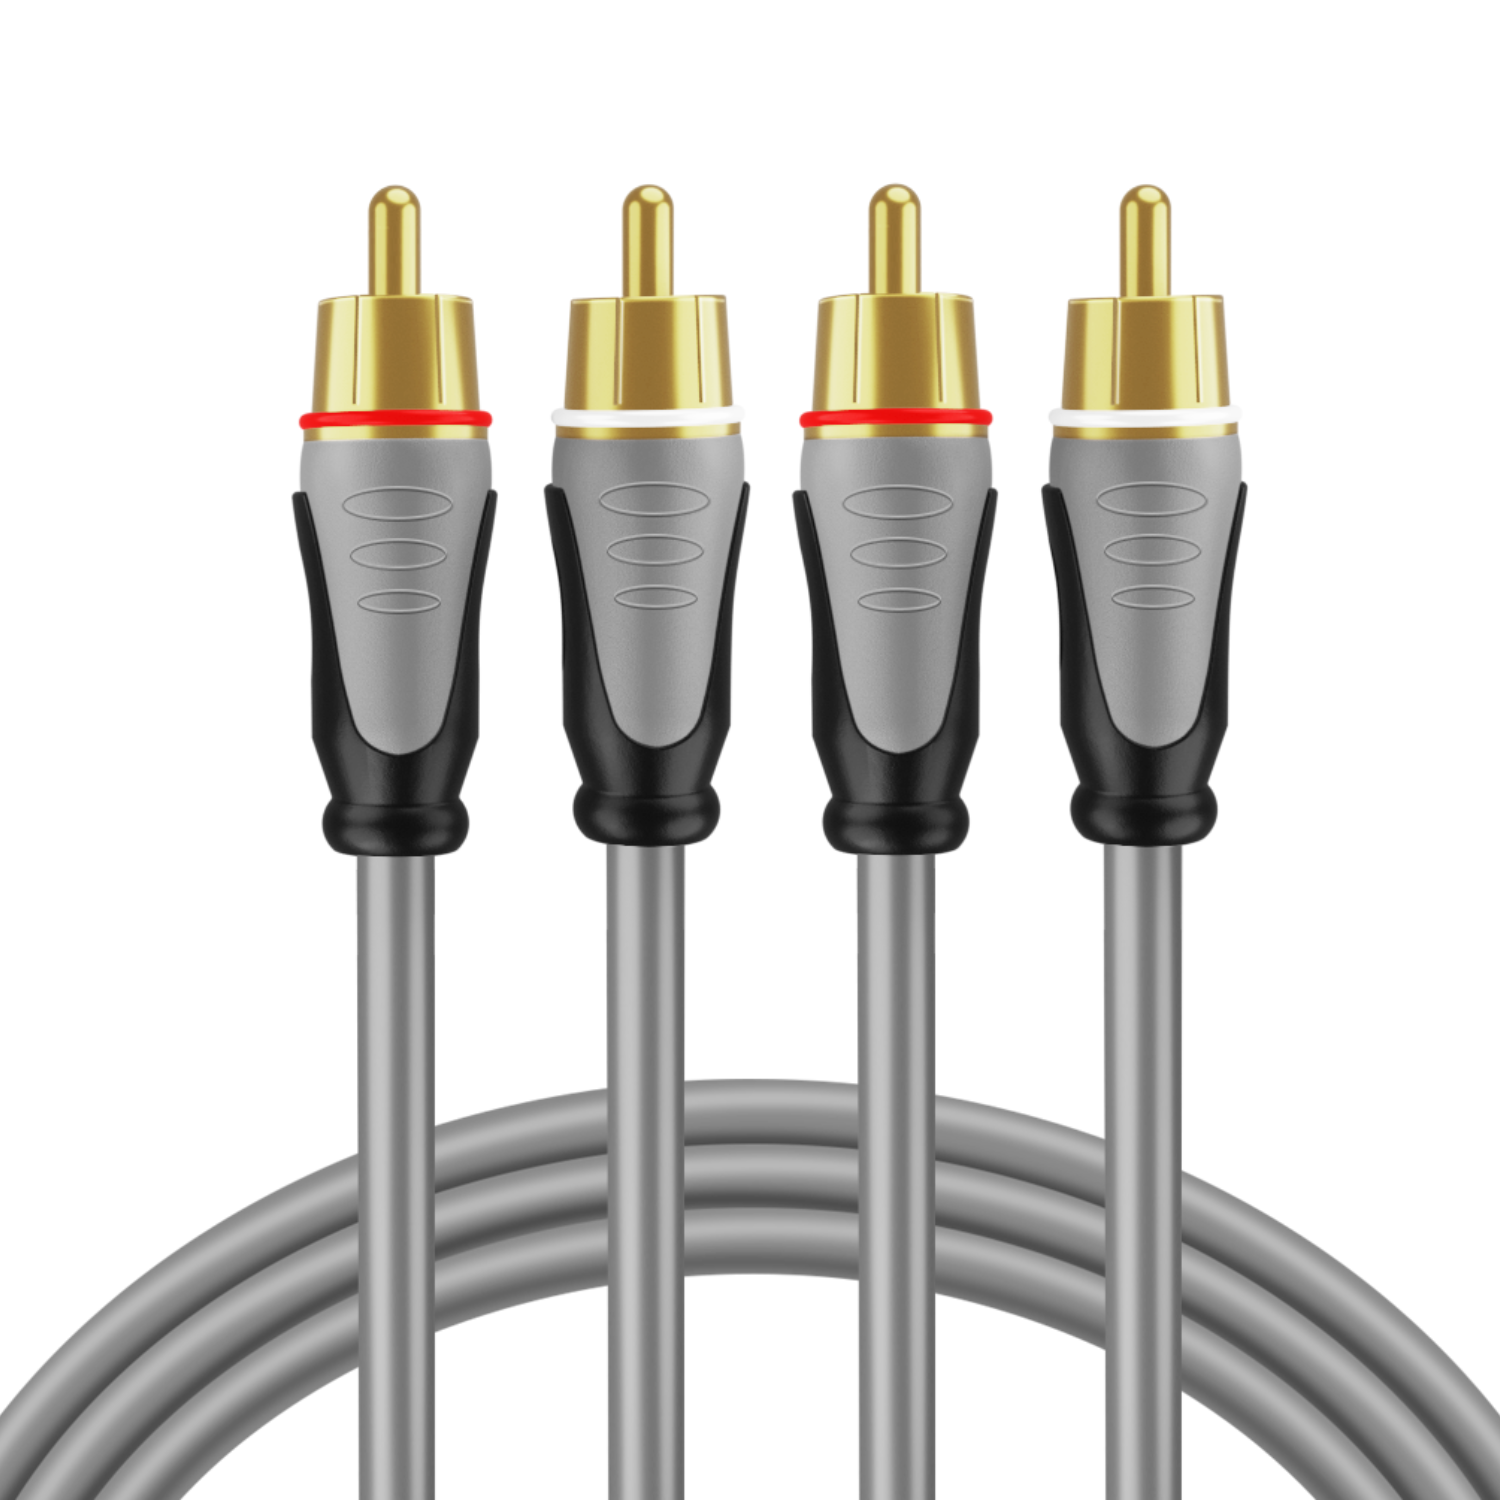 RCA Cable - 2RCA Male to 2RCA Male with Dual Shielded RCA Audio Cable - 2 Channel RCA Male to Male Stereo Connector, Gold Plated RCA Cables 50ft for Amplifiers, Car Audio, Home Theater, Speakers - image 2 of 6